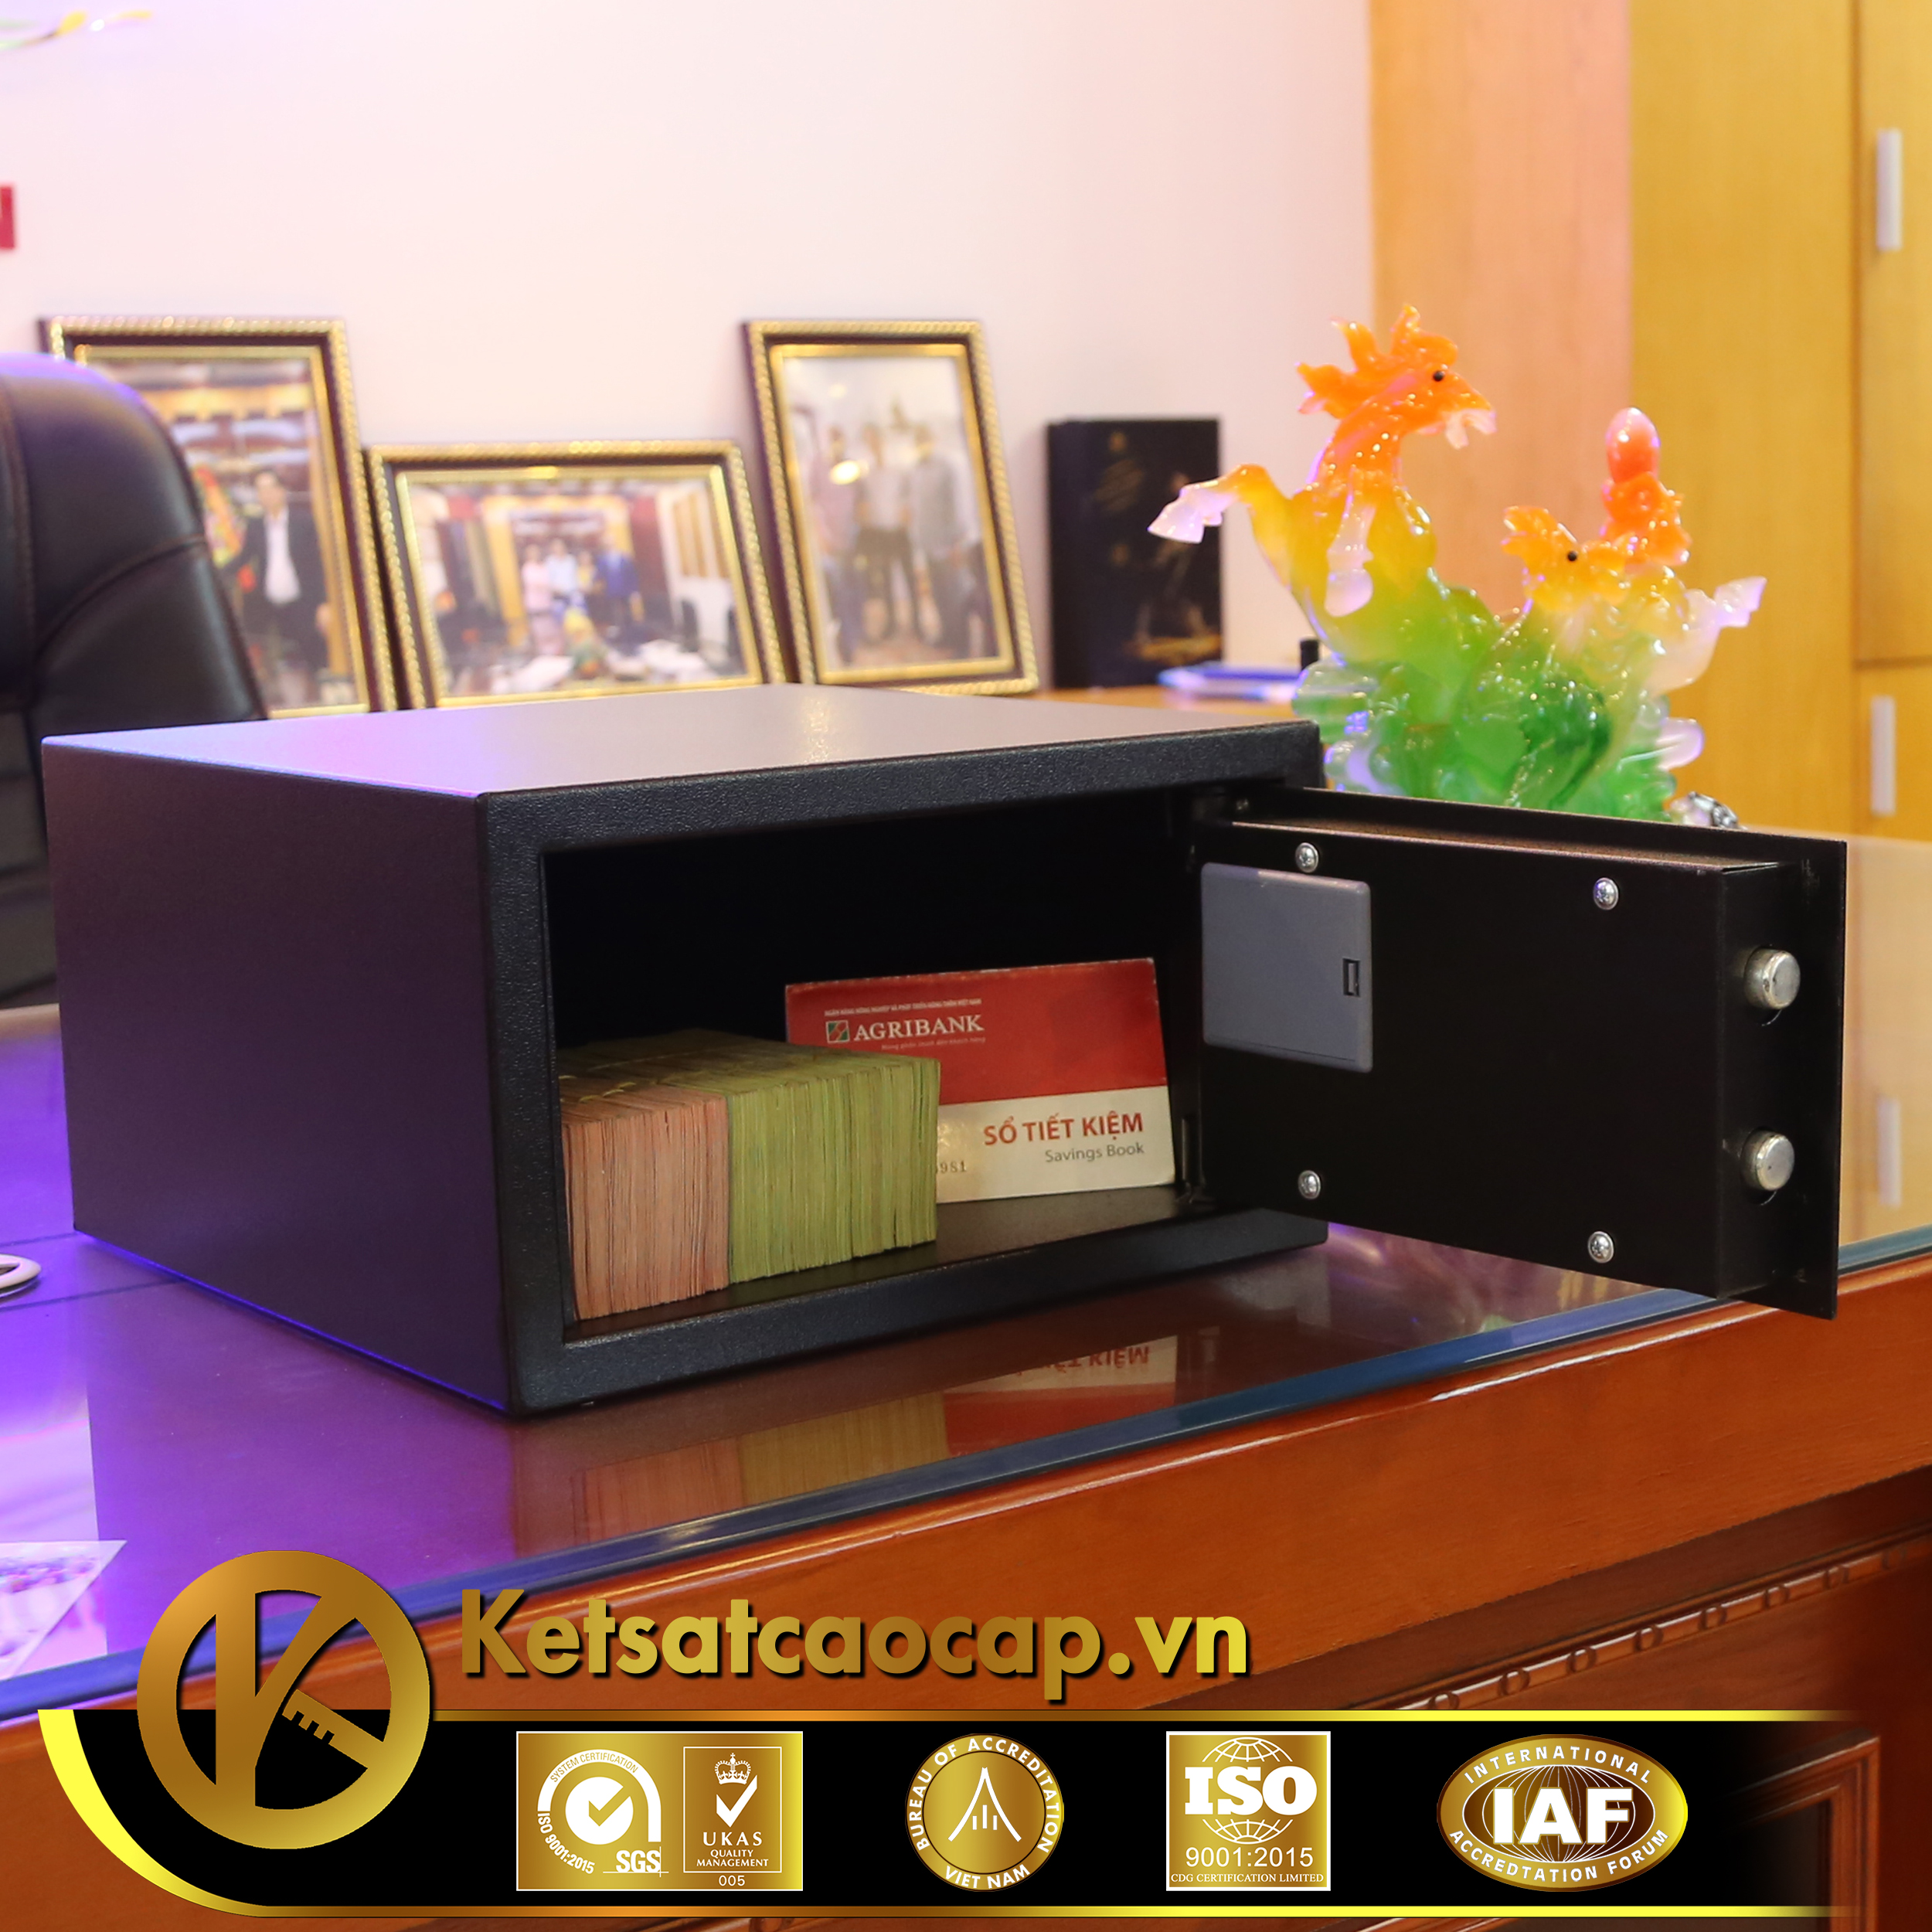 Hotel Drawer Safe Suppliers and Exporters‎